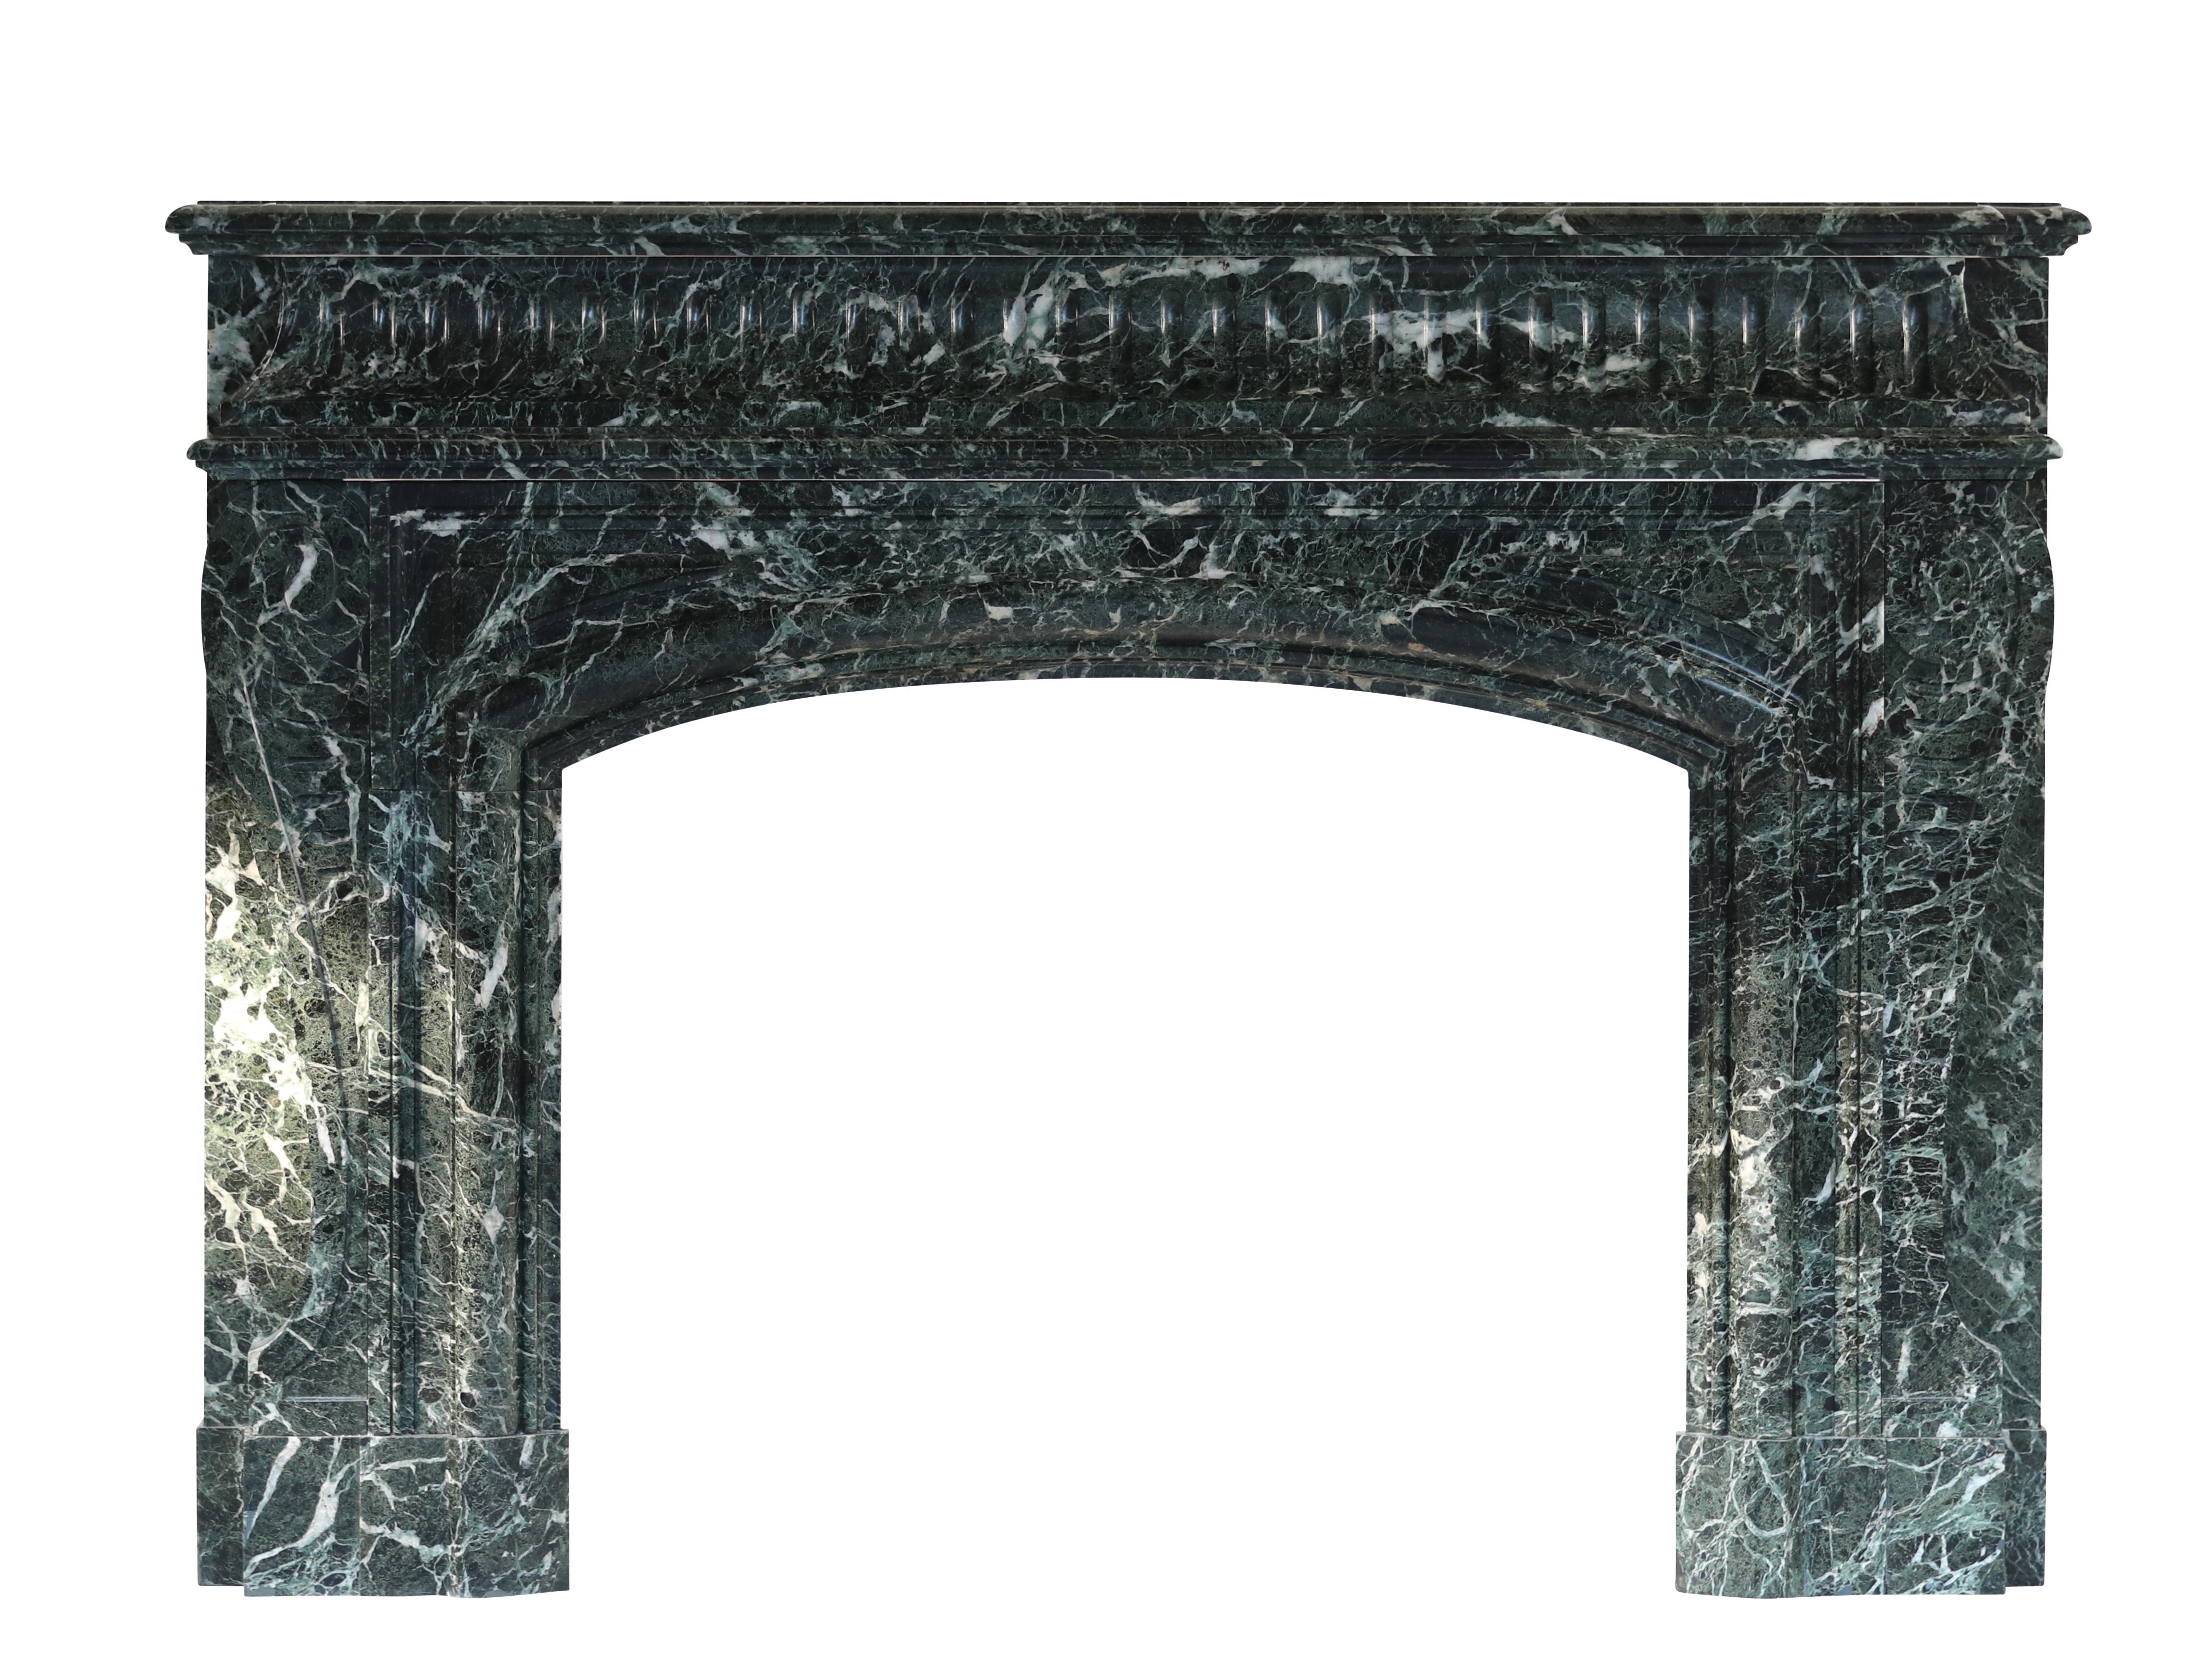 Original Belgian vintage fireplace piece in a French green color marble from the 19th century. It has grand proportions and was installed in a Brussels pannel Notary office. Super Belle Epoque piece.
Measures:
182 cm exterior width 71,66 inch
132